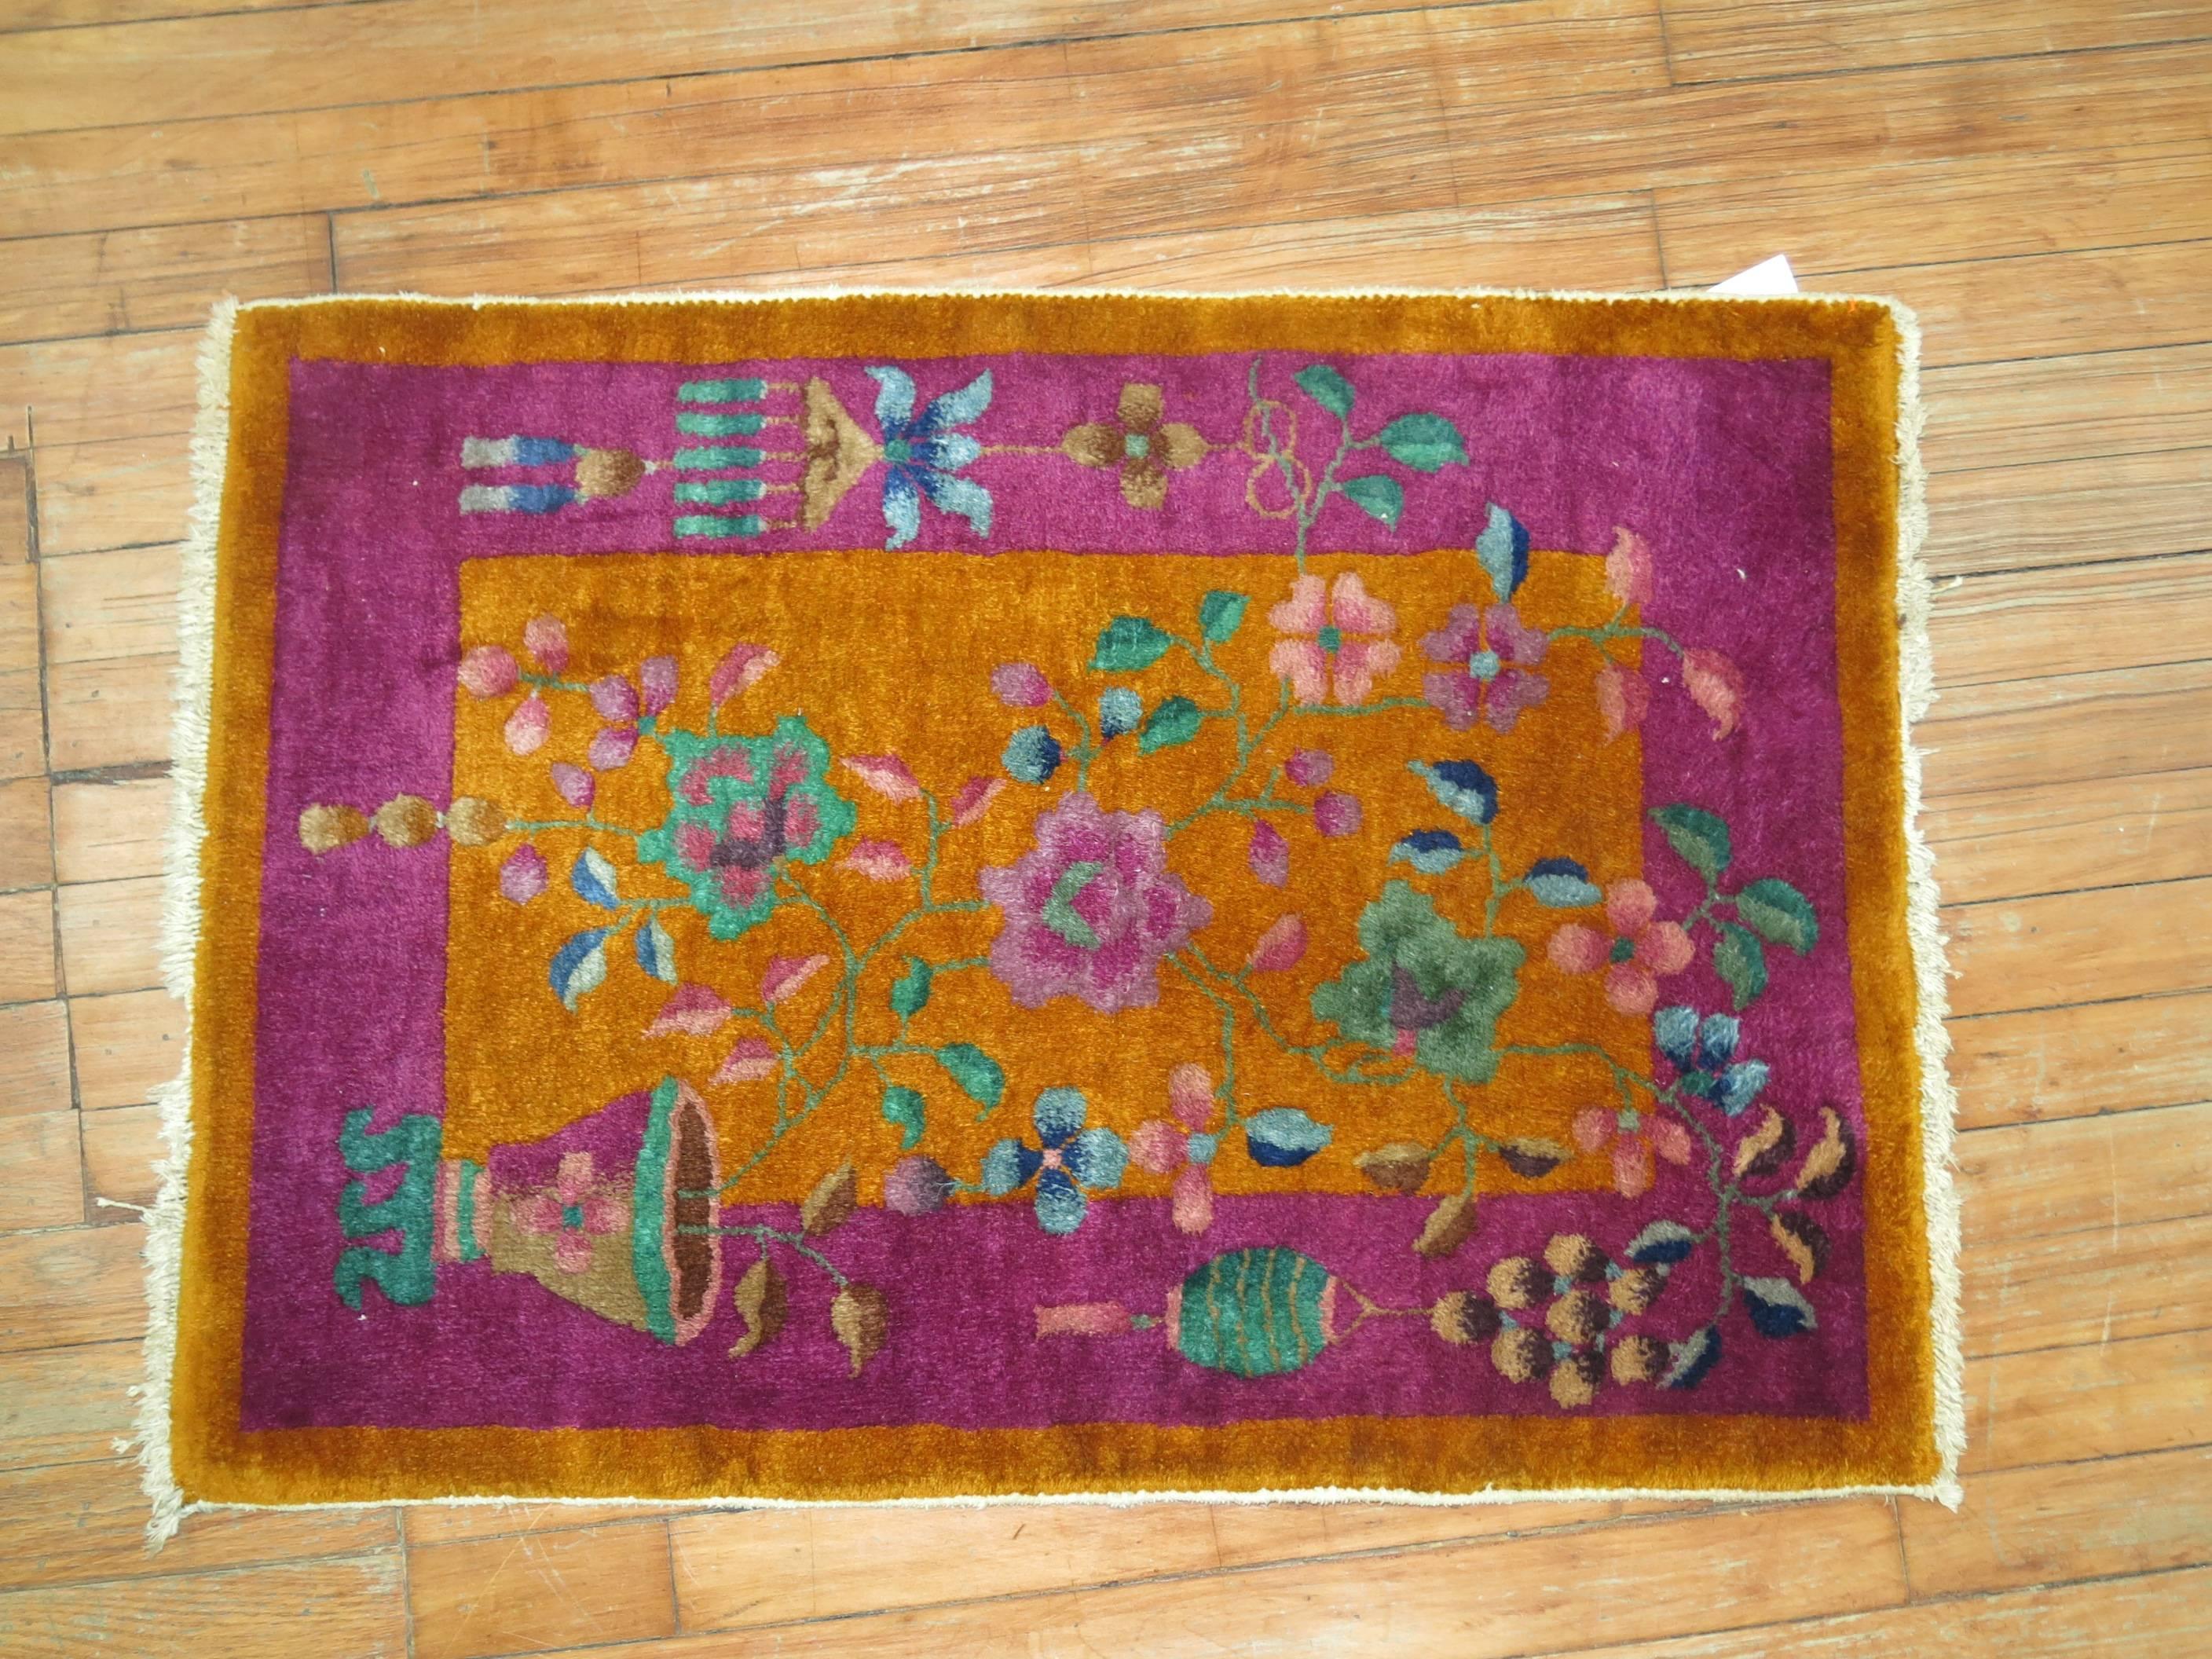 A jazzy colored full pile excellent condition Chinese Art Deco rug mat from the mid-20th century.